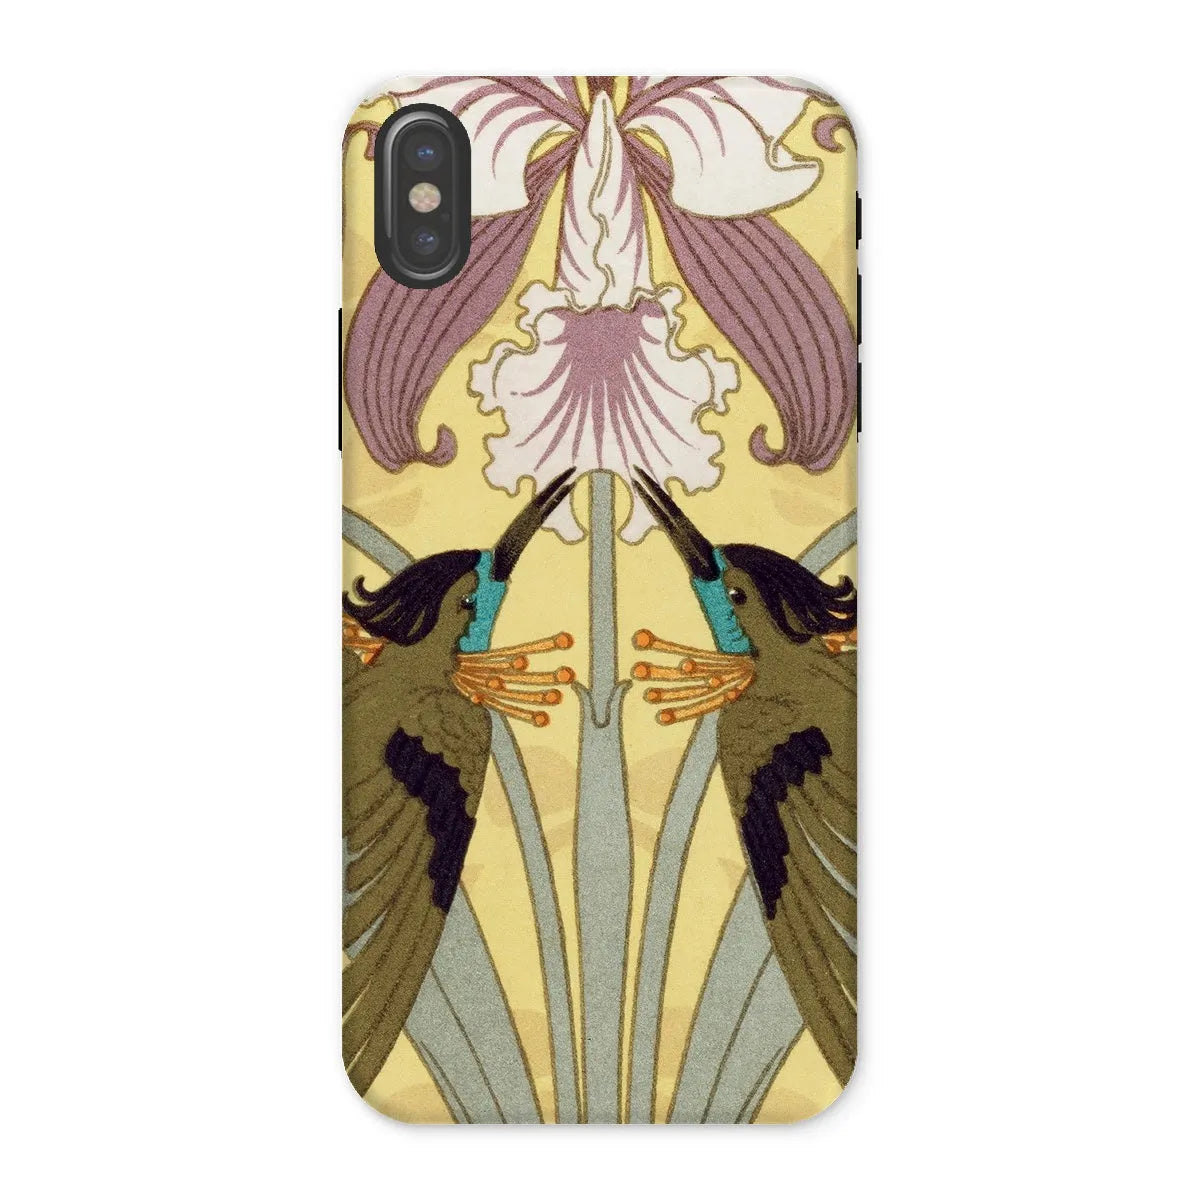 Hummingbirds And Orchids Phone Case - Maurice Pillard Verneuil - Iphone x / Matte - Mobile Phone Cases - Aesthetic Art